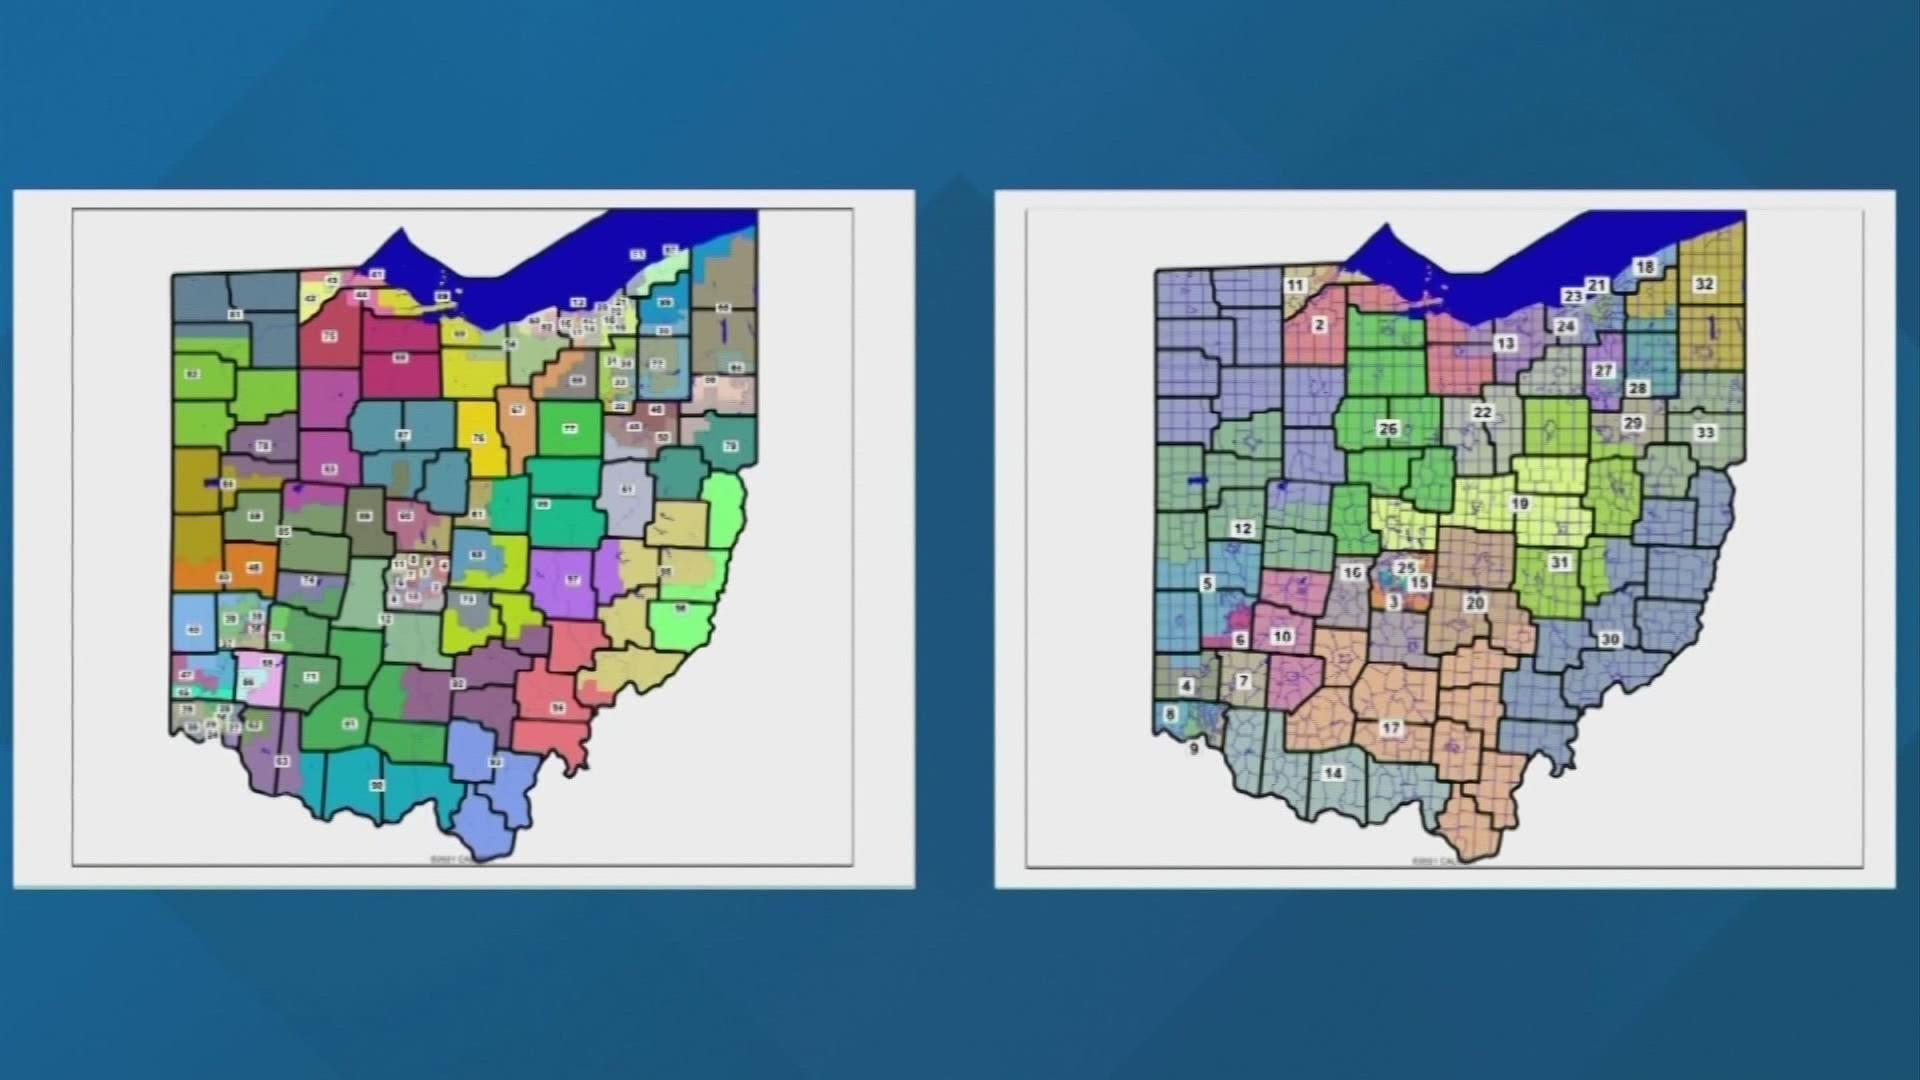 The redistricting committee voted to approve the previously rejected maps 4-3.